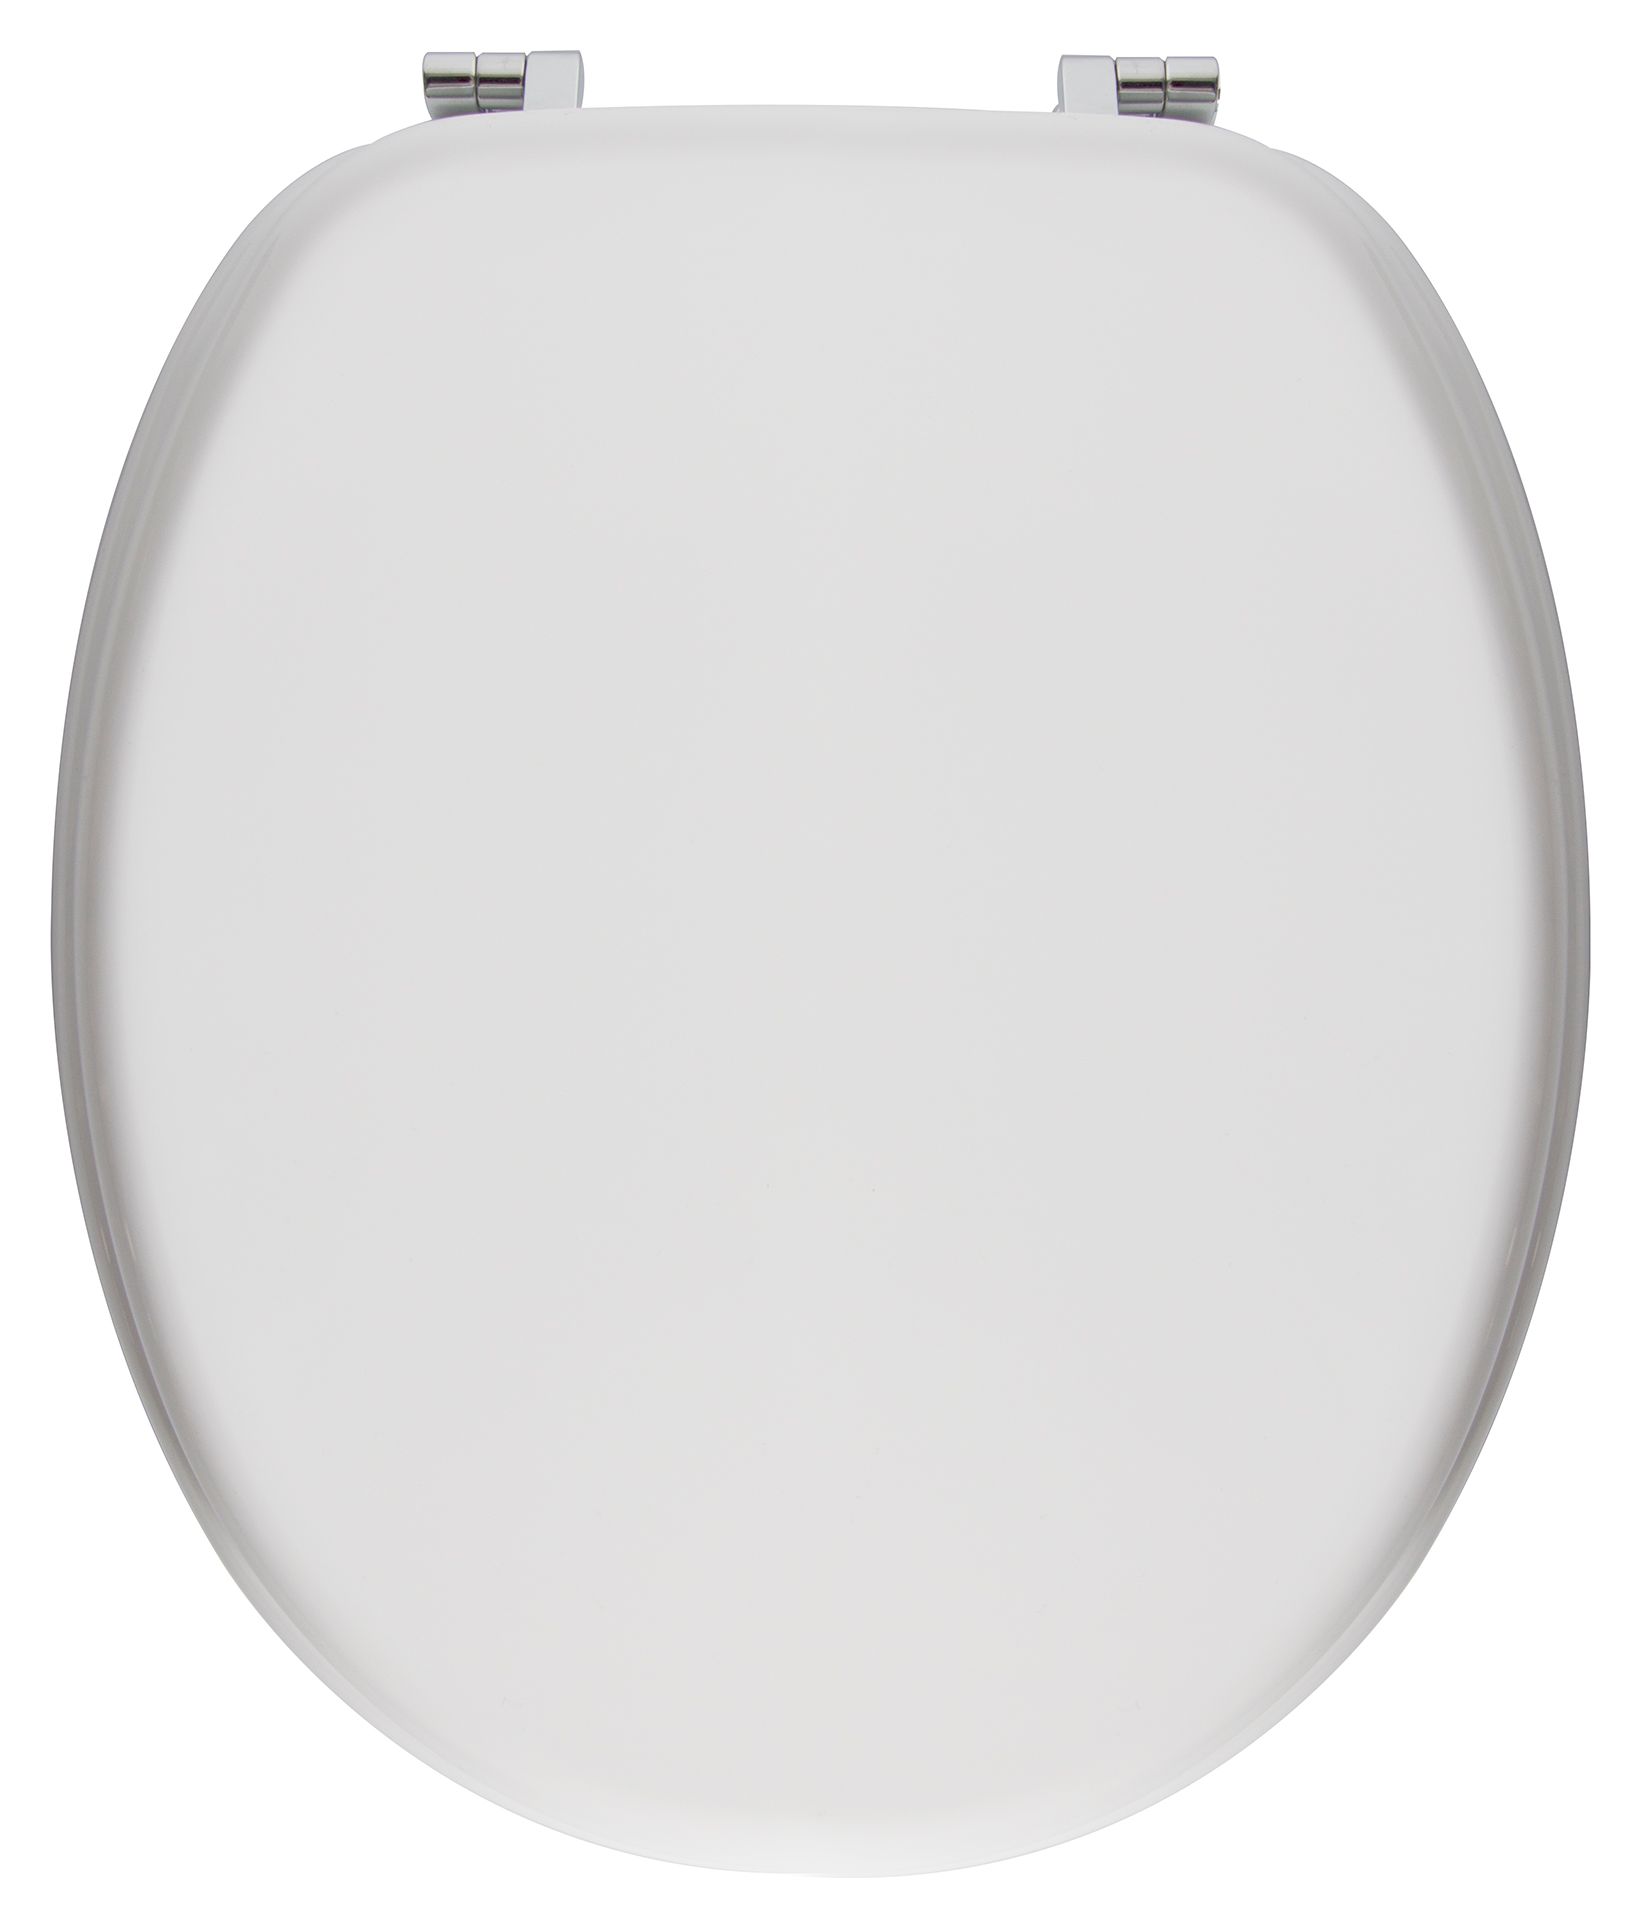 Image of Wickes Wooden Standard Close Toilet Seat - White